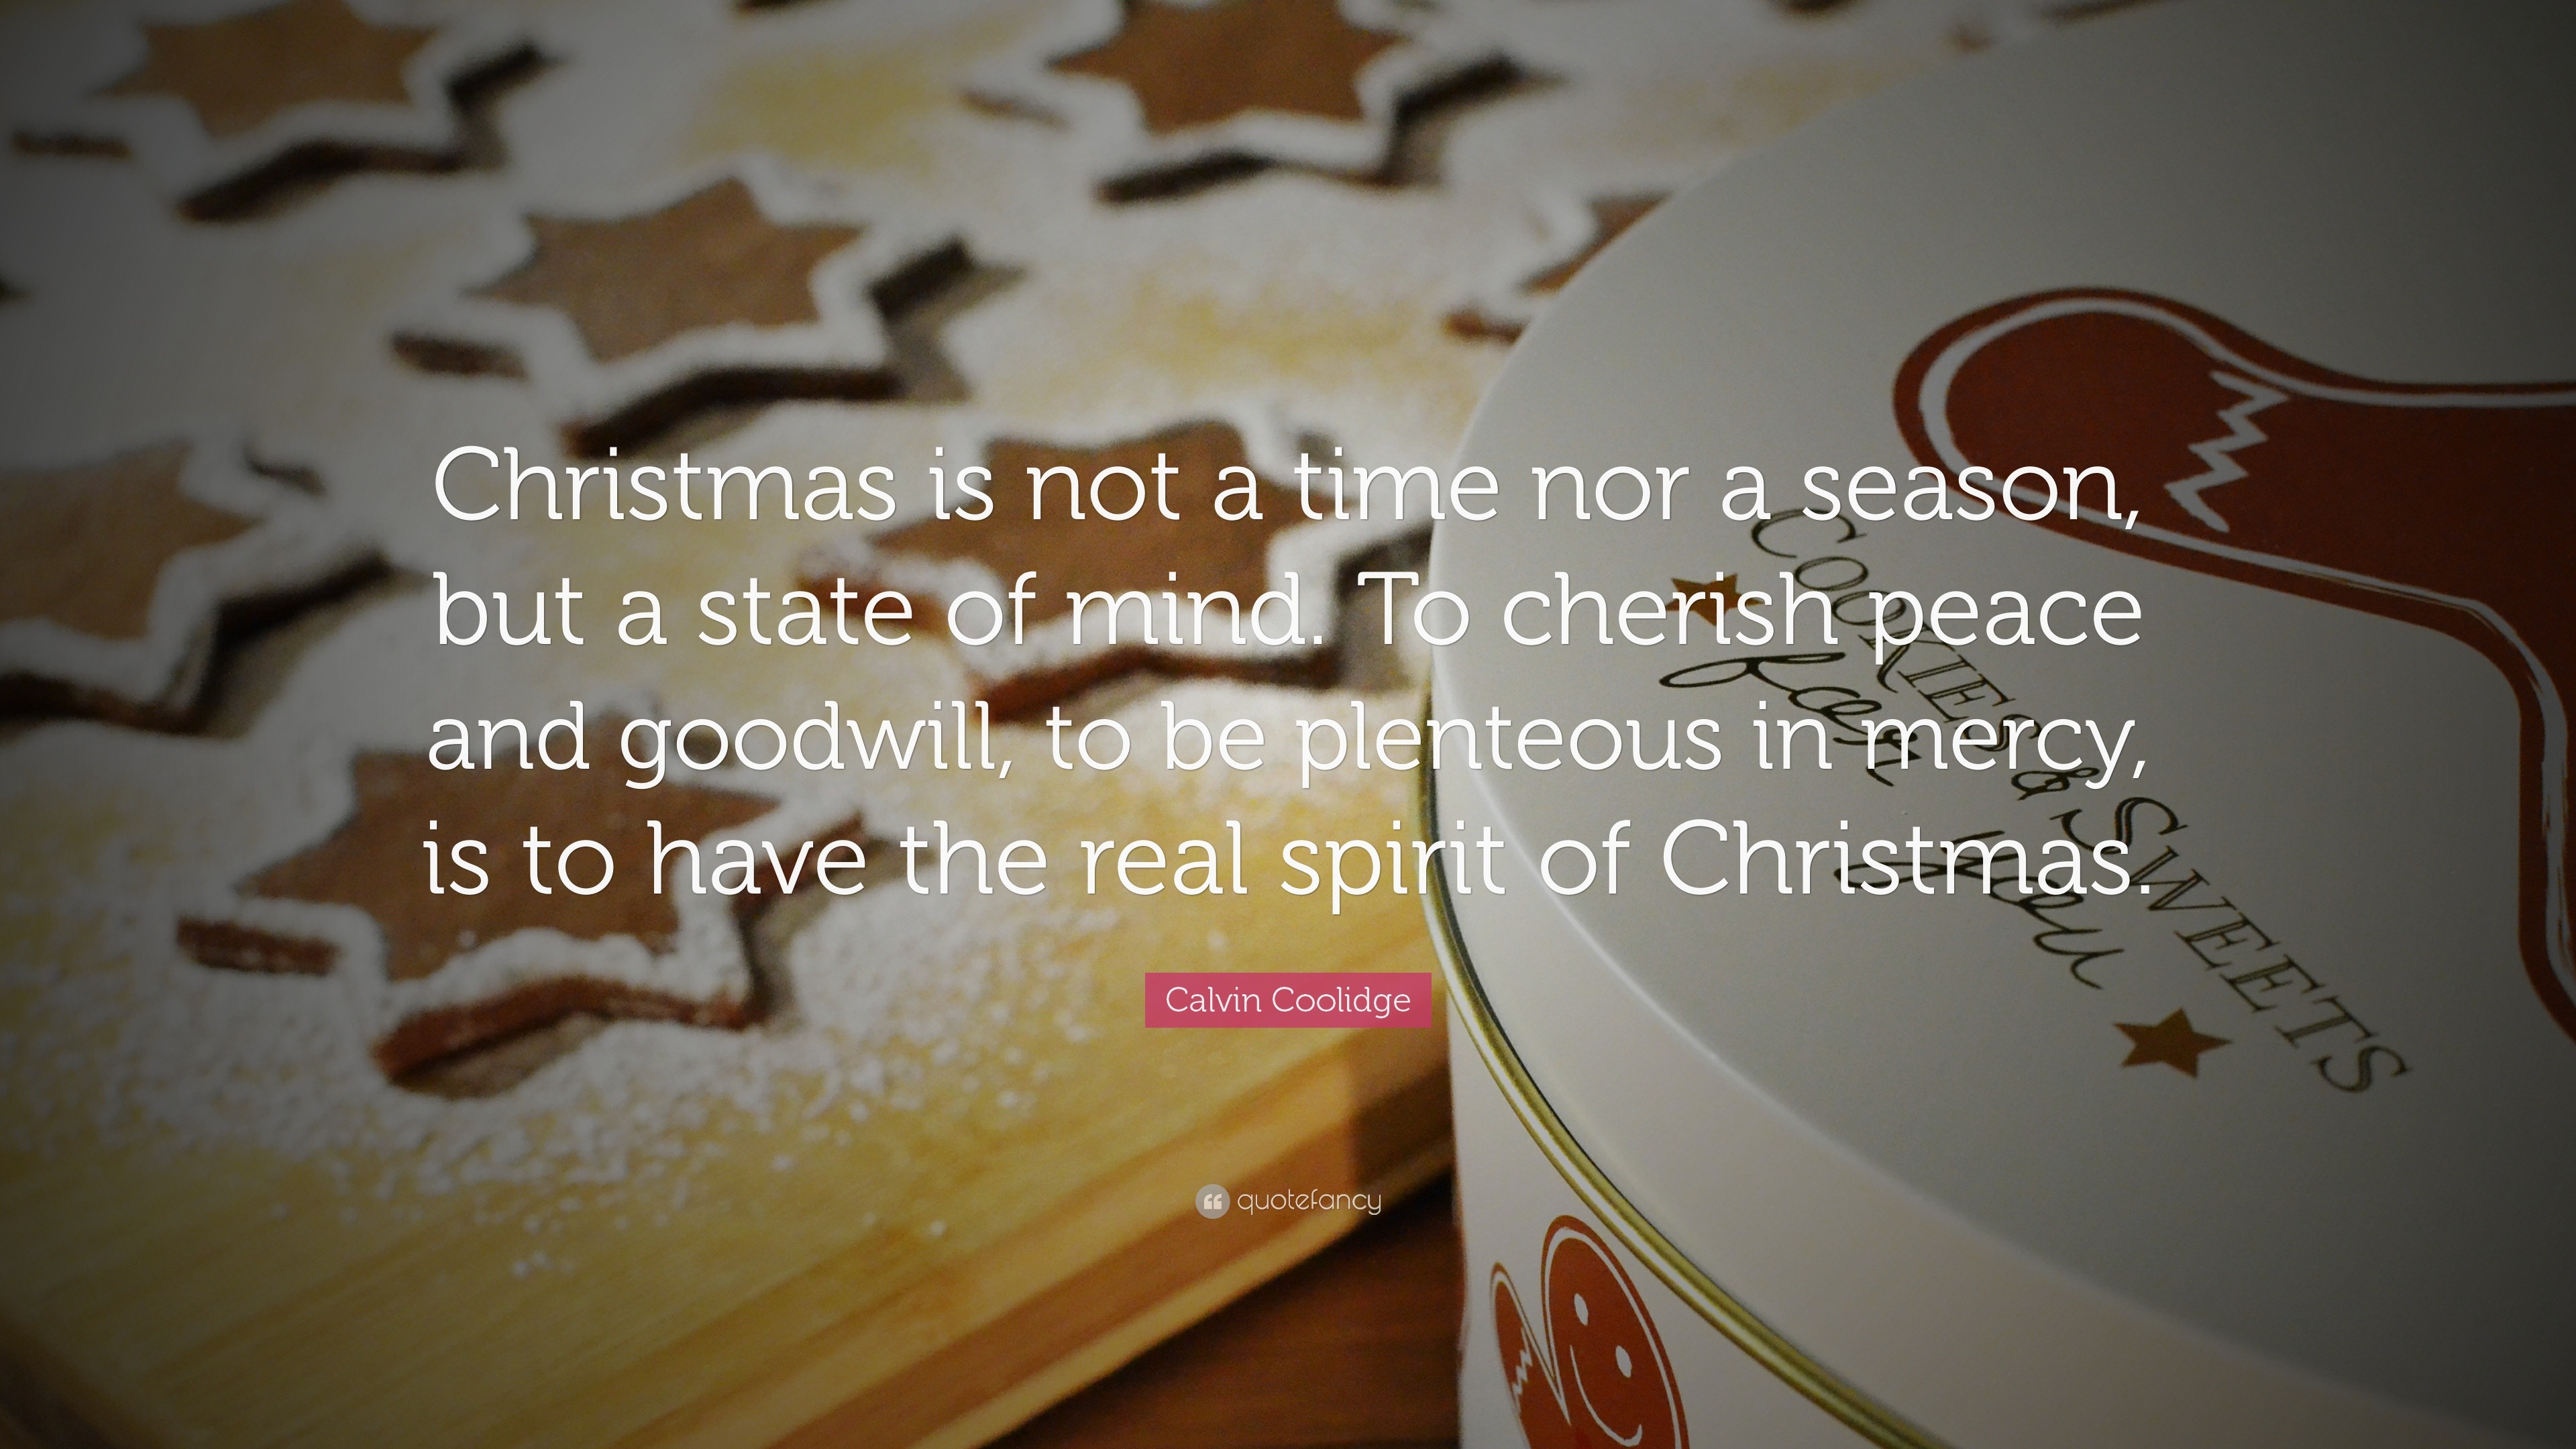 Calvin Coolidge Quote “Christmas is not a time nor a season but a